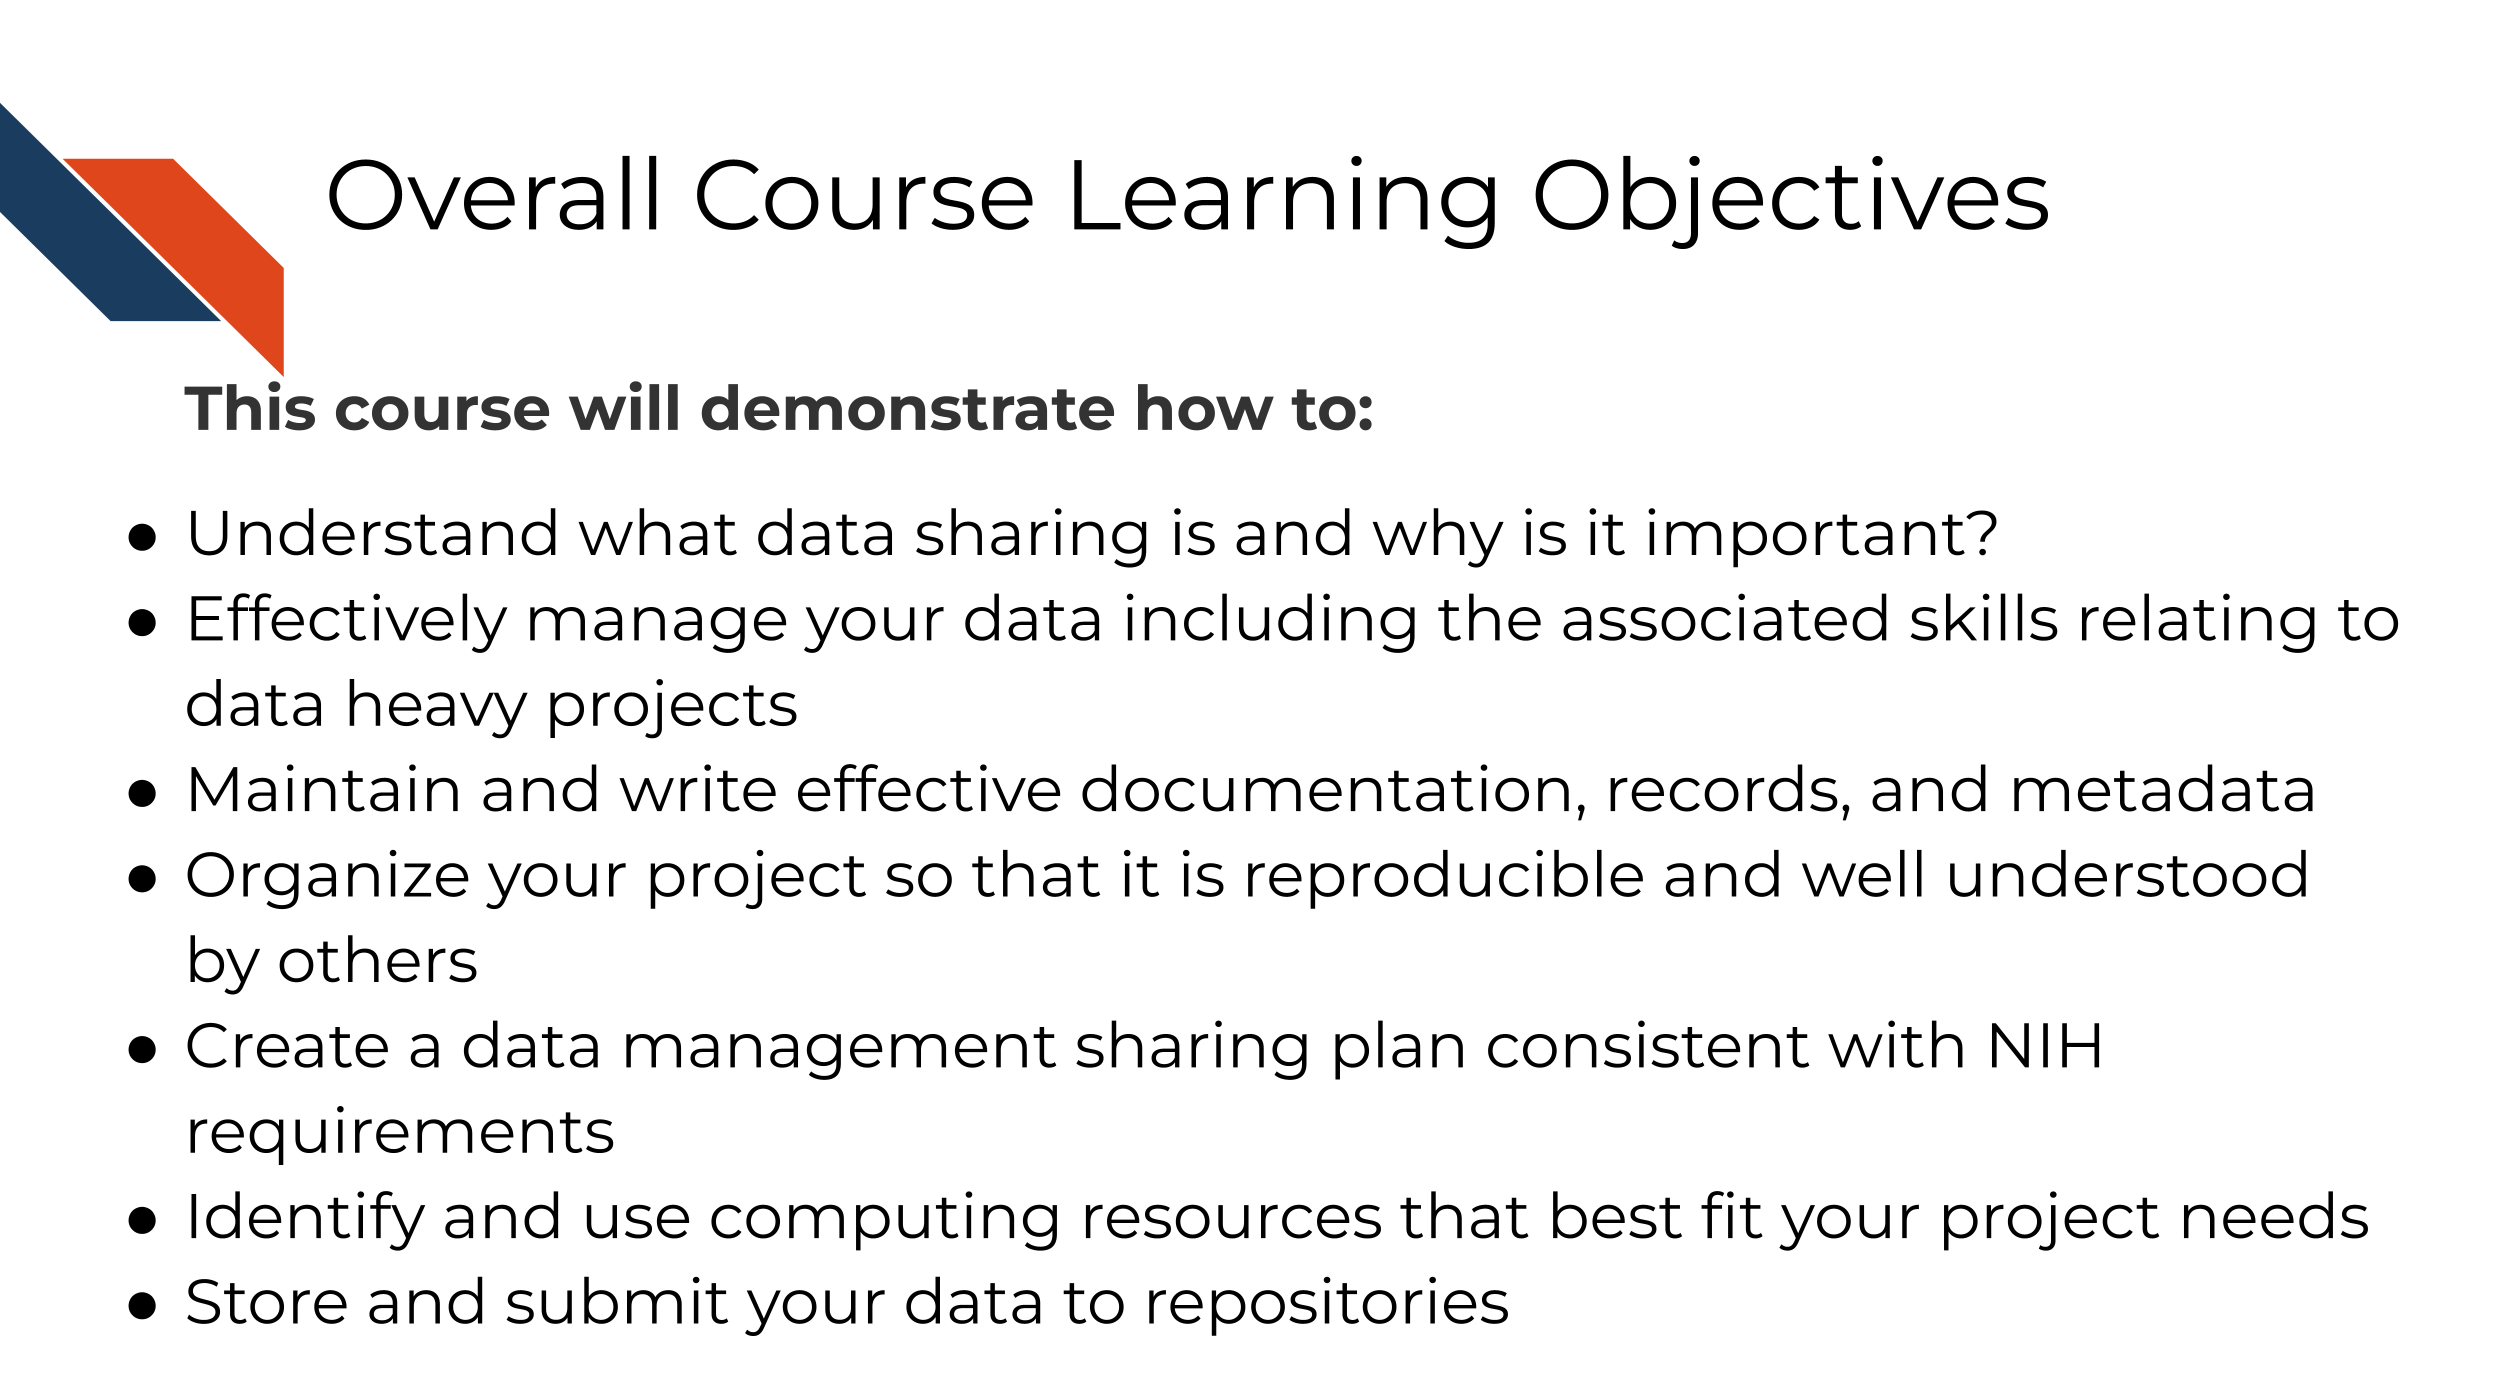 This overall learning objectives of this course are to demonstrate how to: Understand what data sharing is and why is it important?, Effectively manage your data including the associated skills relating to data heavy projects, Maintain and write effective documentation, records, and metadata, Organize your project so that it is reproducible and well understood by others, Create a data management sharing plan consistent with NIH requirements, Identify and use computing resources that best fit your project needs, Store and submit your data to repositories